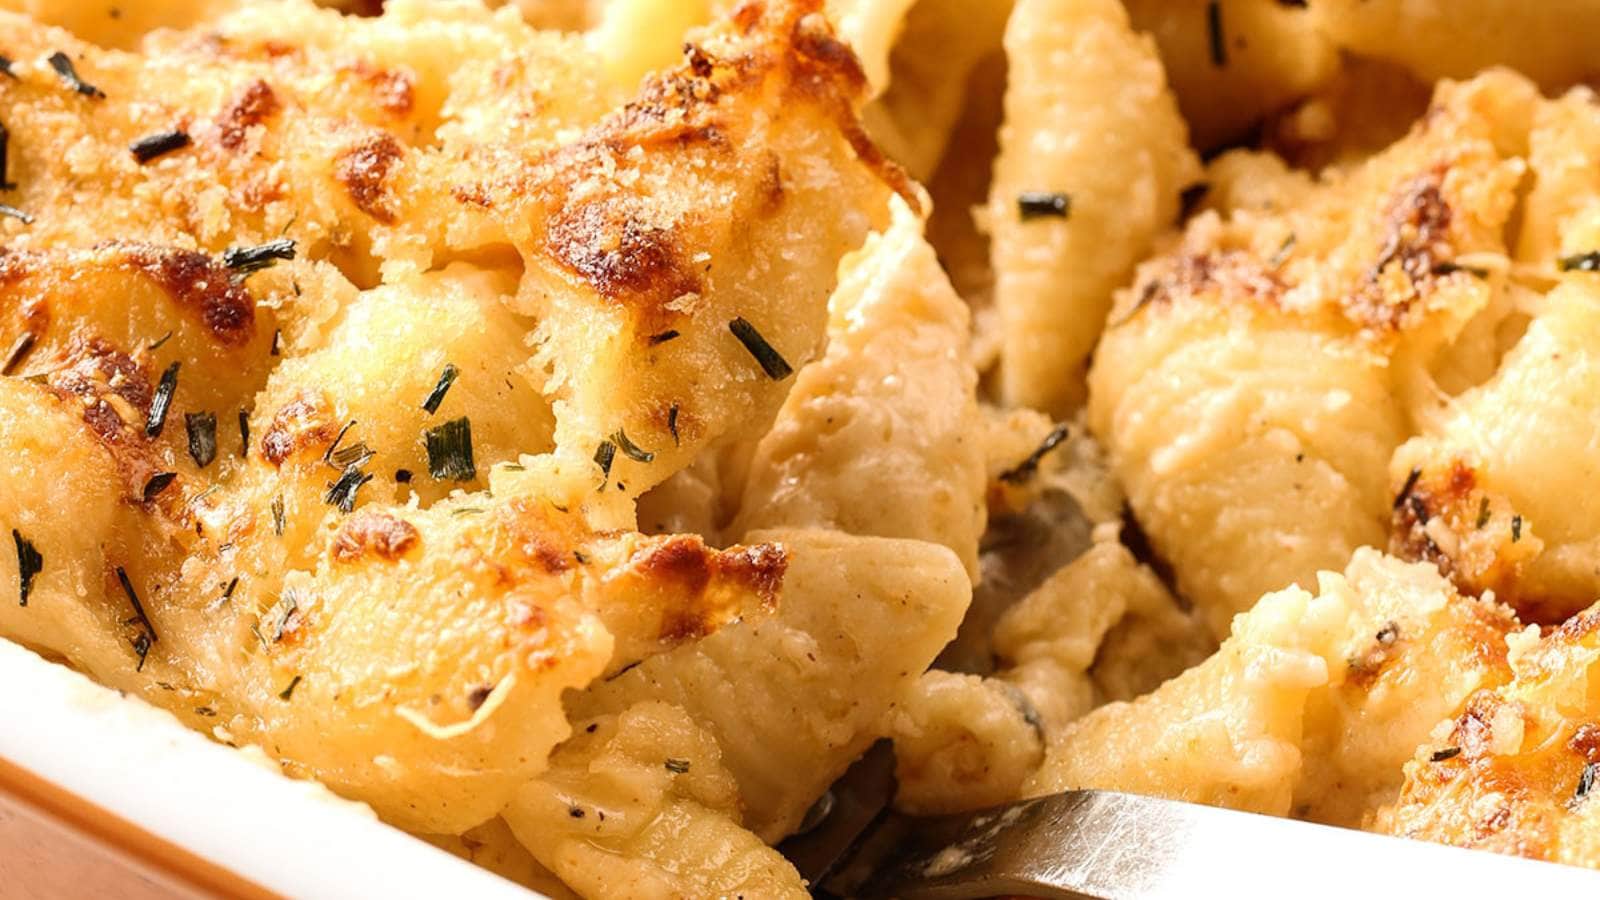 <p>Are you ready to dig into a superbly cheesy 3 cheese pasta bake? With a creamy, tasty, and seriously cheesy pasta sauce accompanied by a perfectly crispy topping made of mozzarella, Parmesan, and breadcrumbs.</p><p><strong>Get the Recipe: </strong><a href="https://knifeandsoul.com/cheesy-pasta-bake/" rel="noreferrer noopener"><strong>3 Cheese Pasta Bake</strong></a></p>